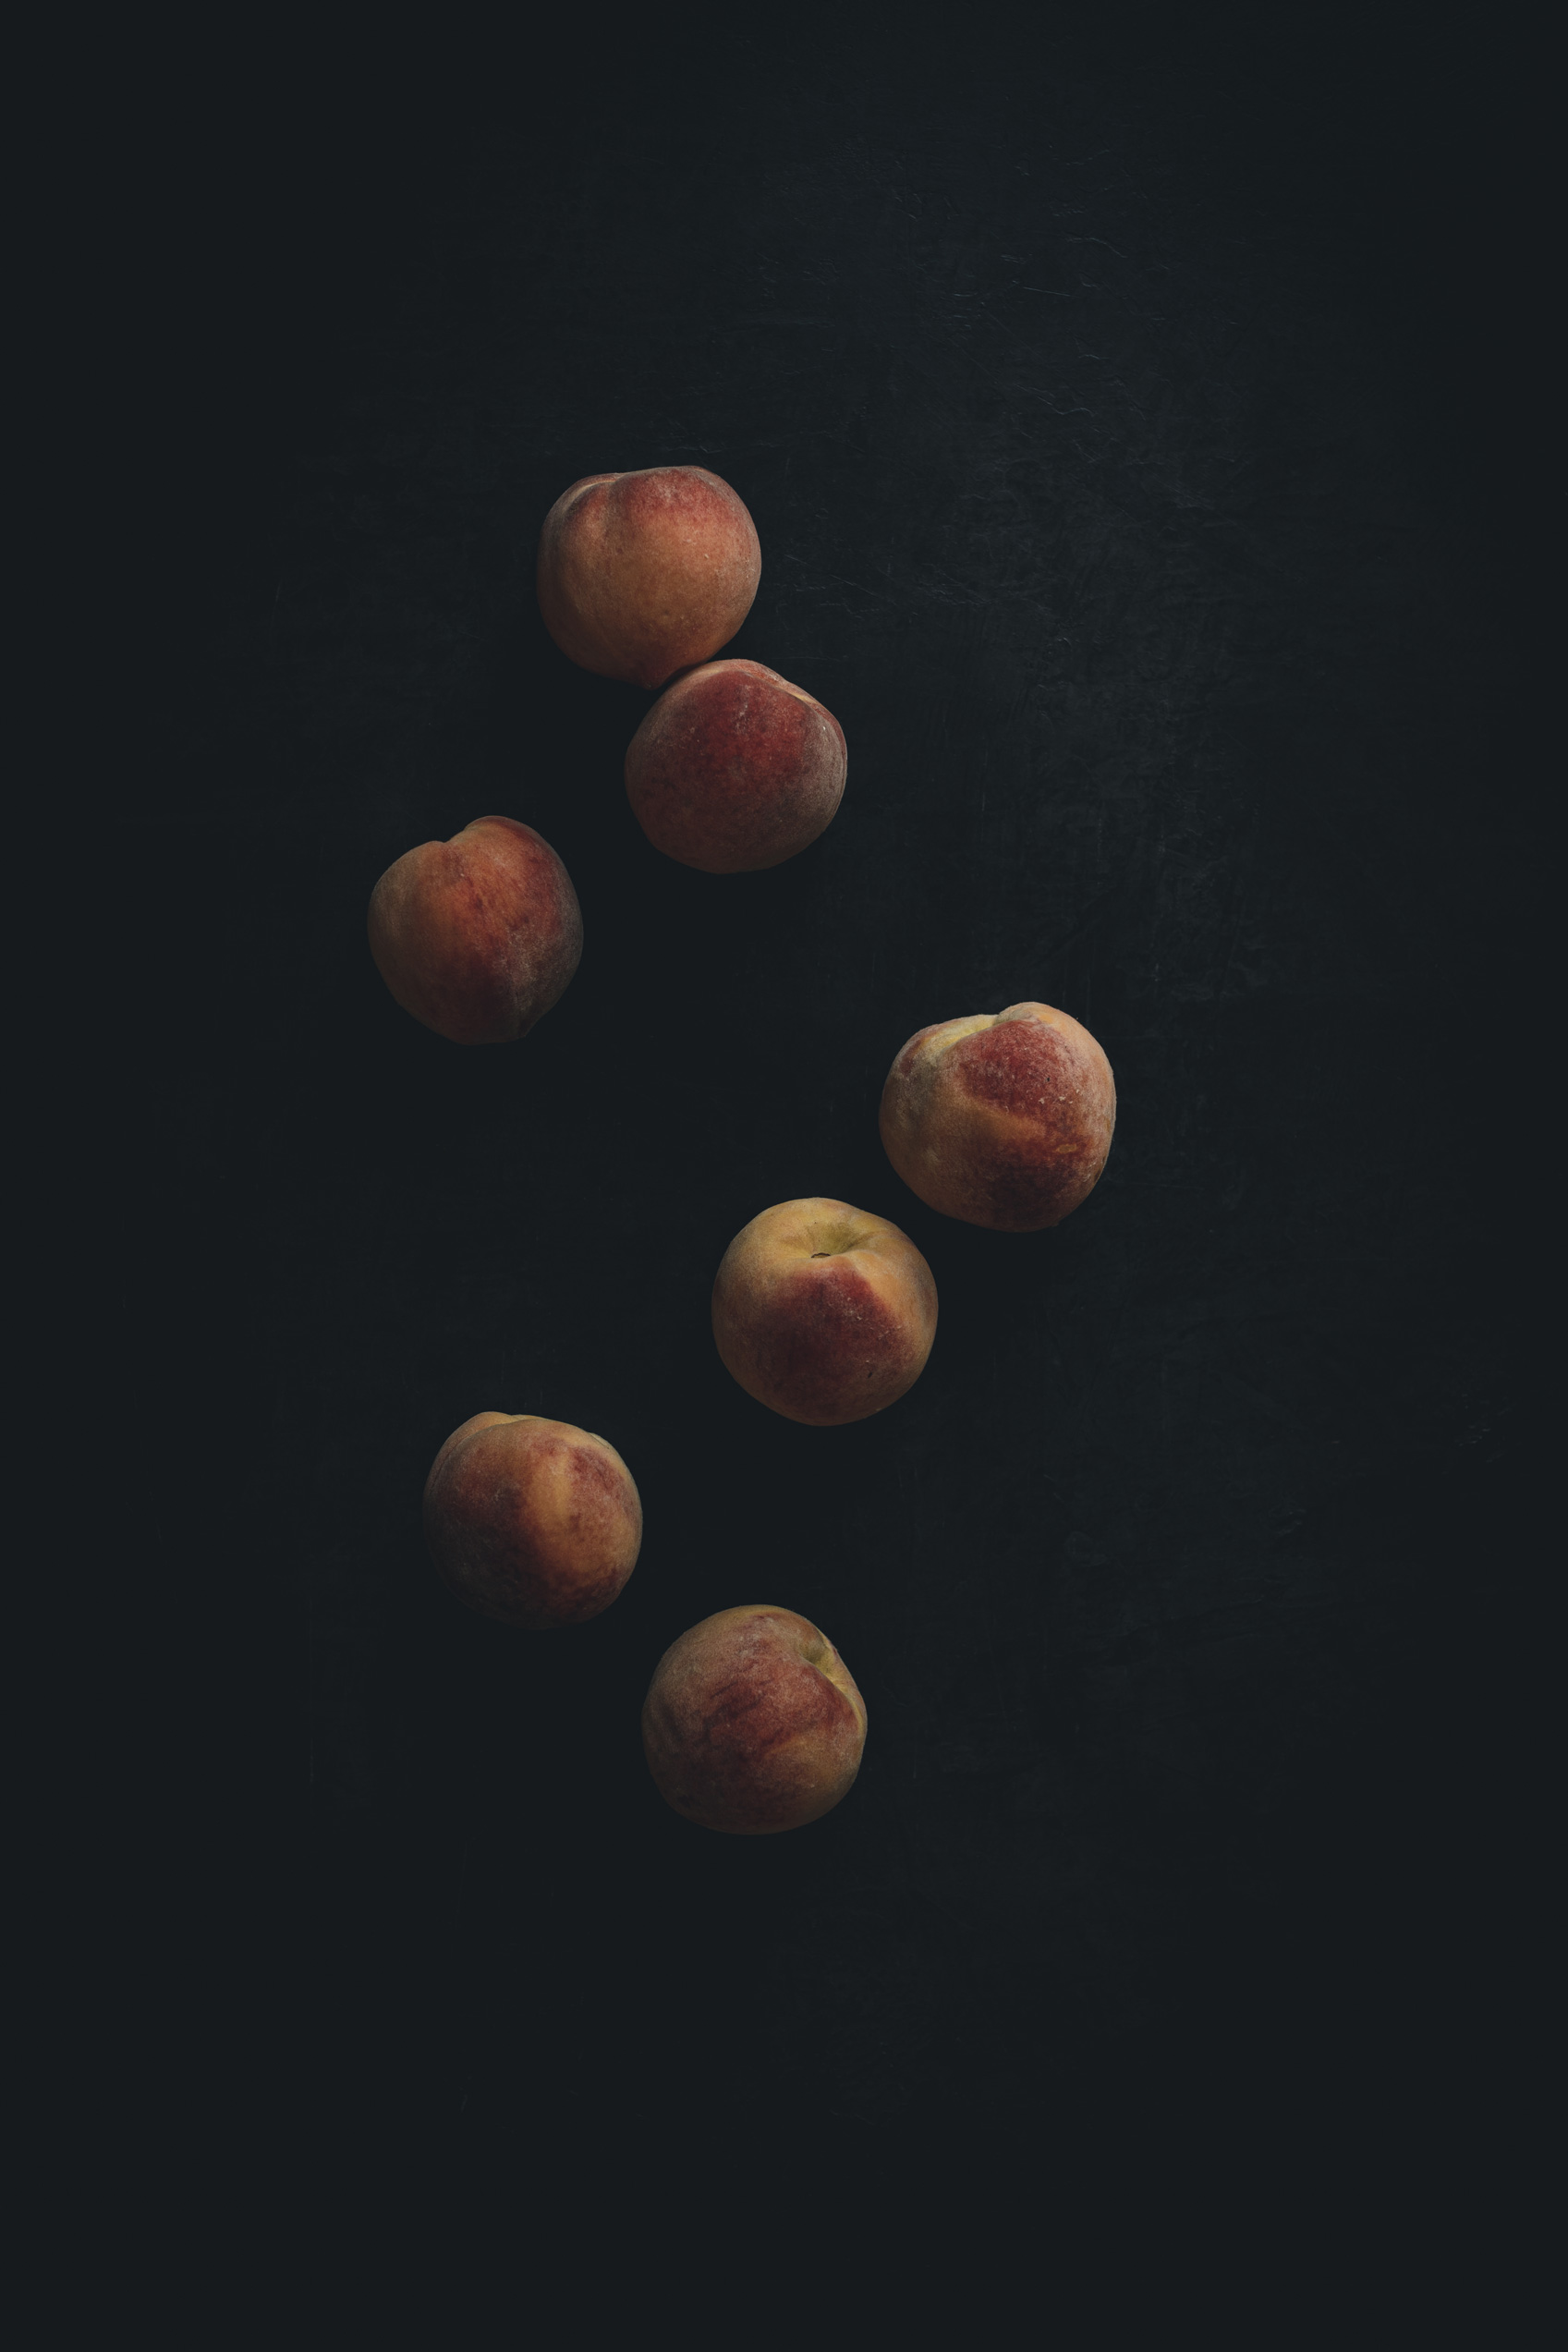 Peaches on a black background from the Moody Food series by John Robson Photography